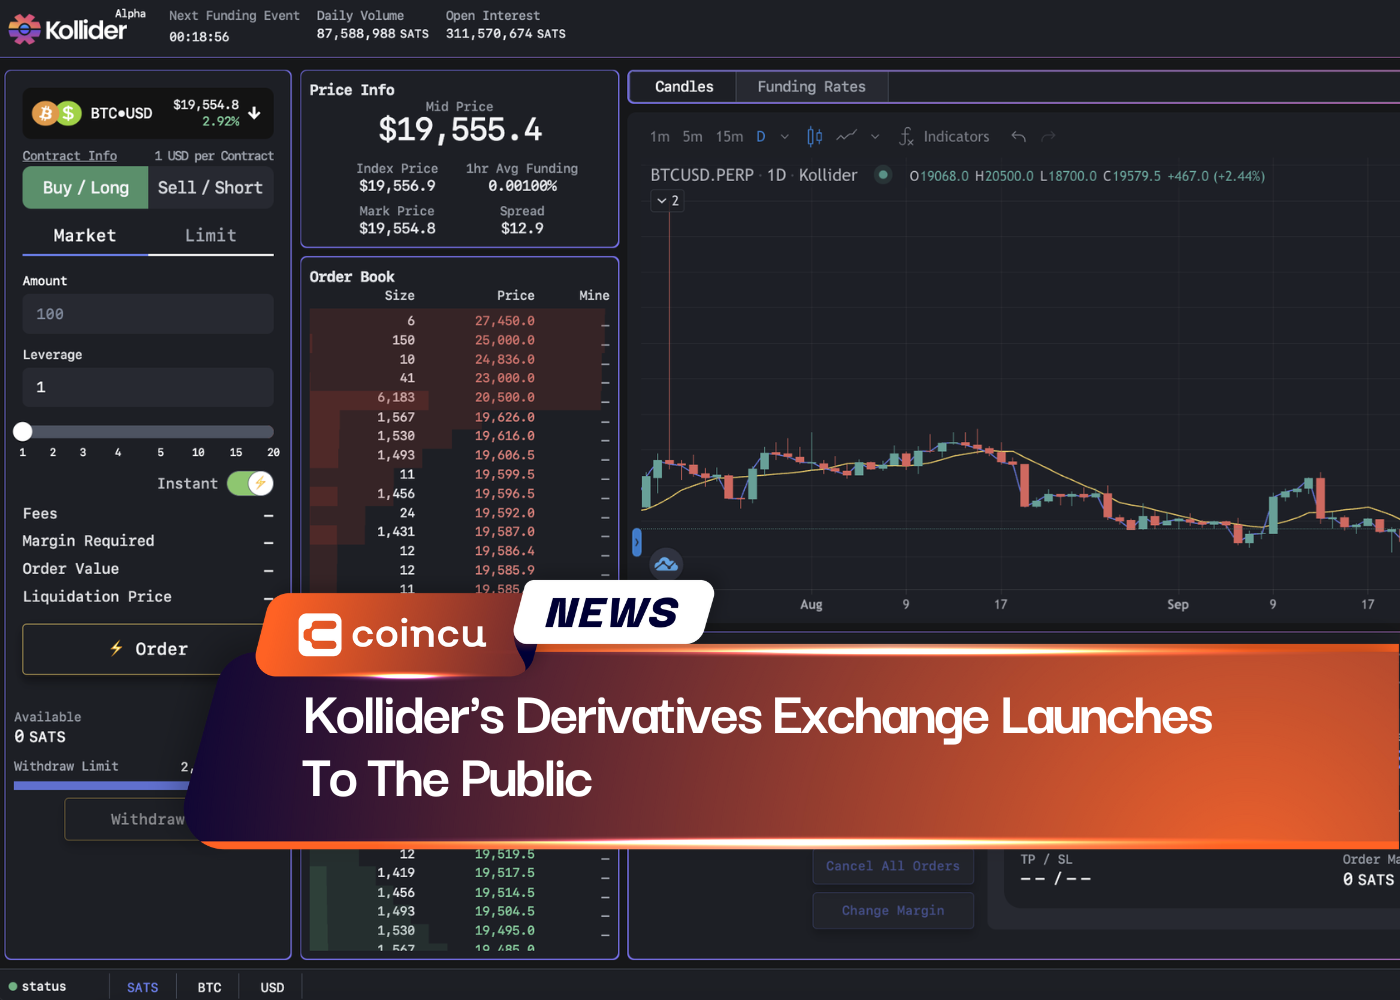 Kollider's Derivatives Exchange Launches To The Public